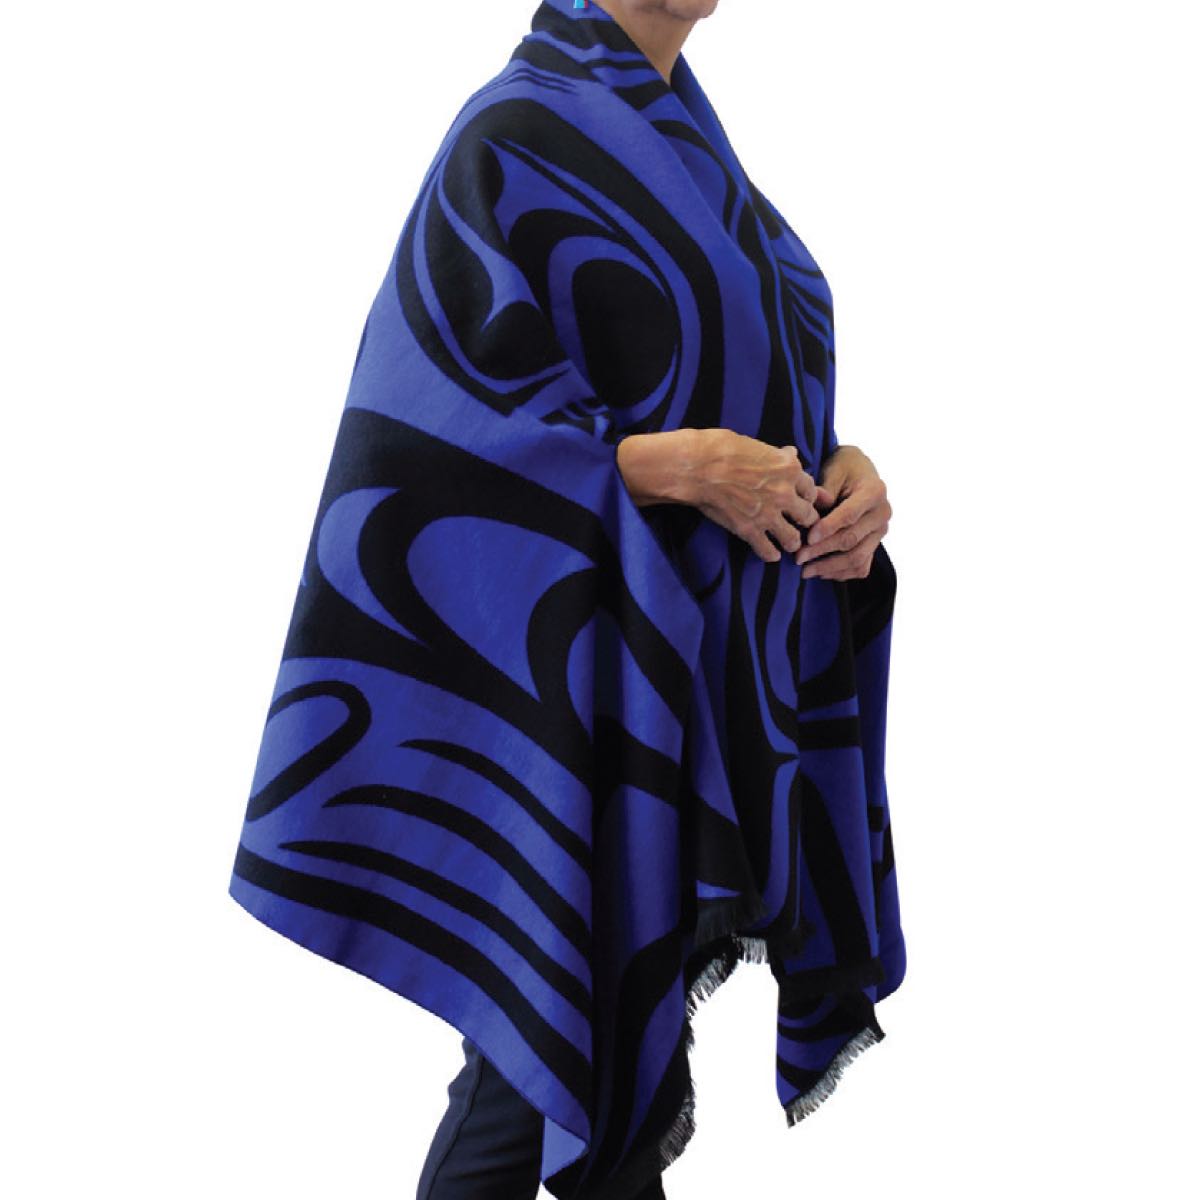 REVERSIBLE FASHION CAPES - Paul Windsor Spirit Wolf Blue - CAPE16 - House of Himwitsa Native Art Gallery and Gifts